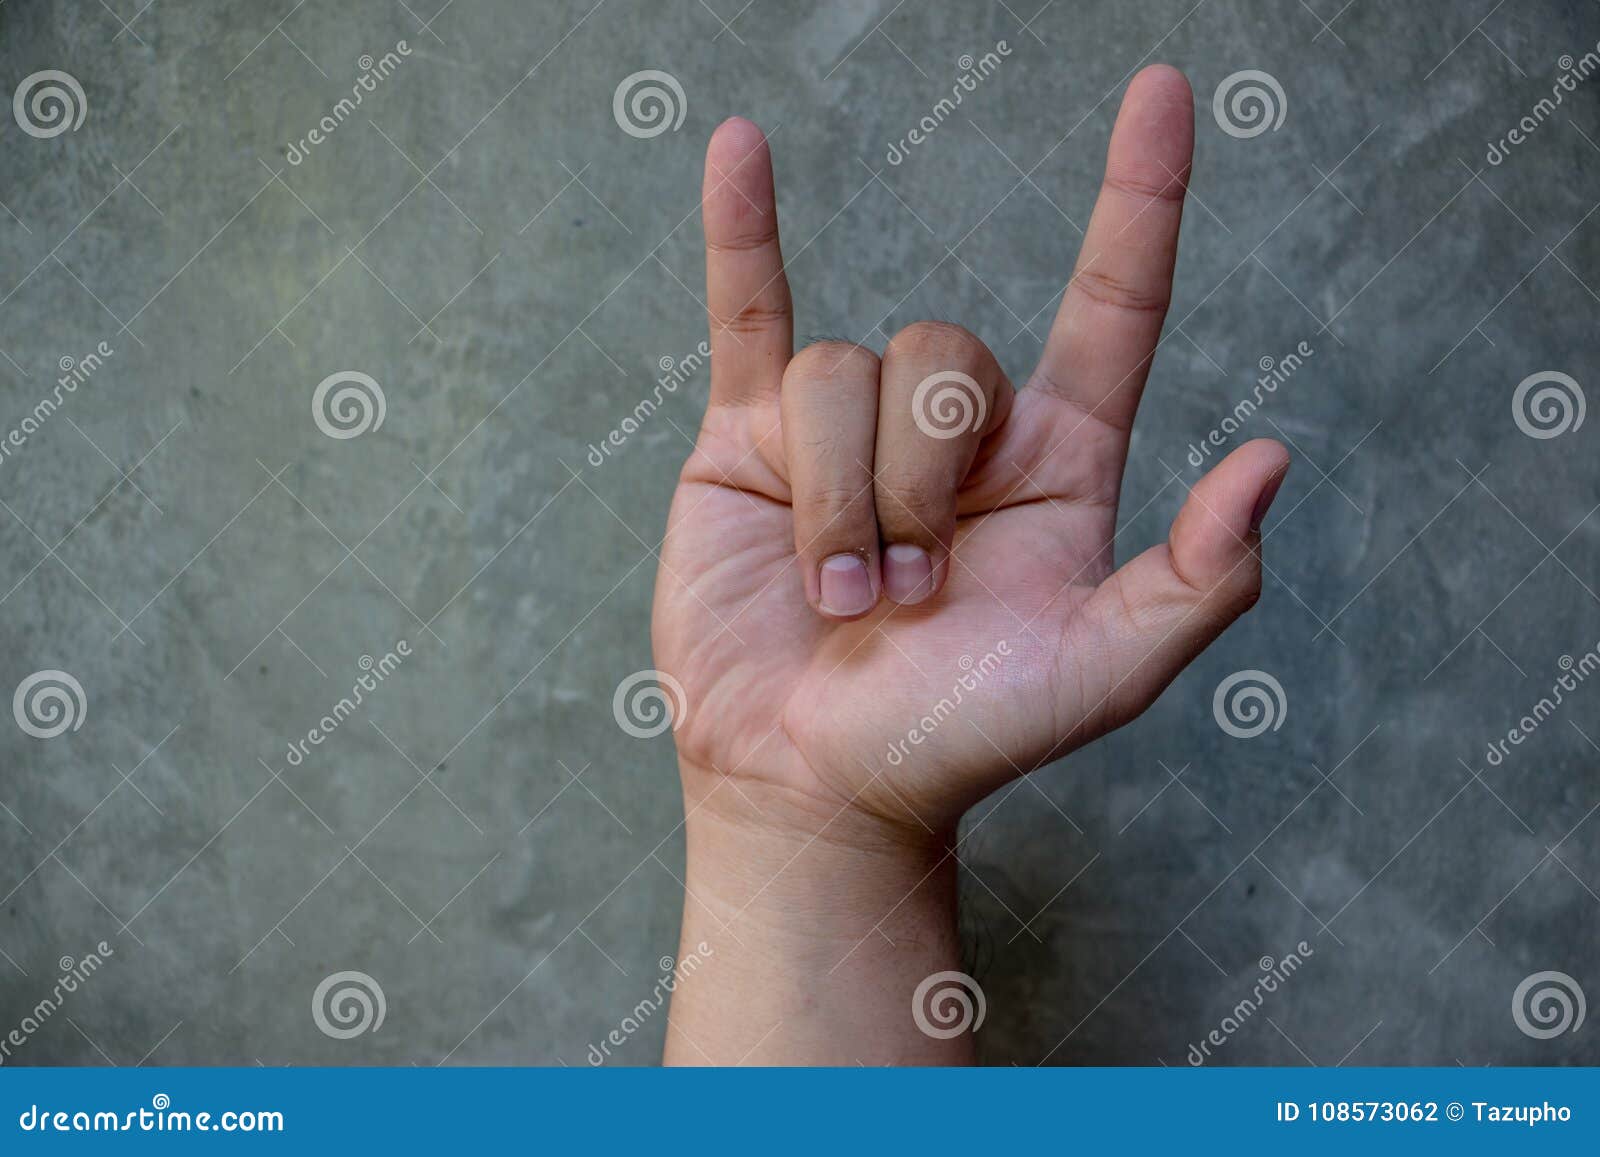 The Ily Is A Sign From The Letters I L And Y Stand For I Love You Stock Photo Image Of Gesturing Help